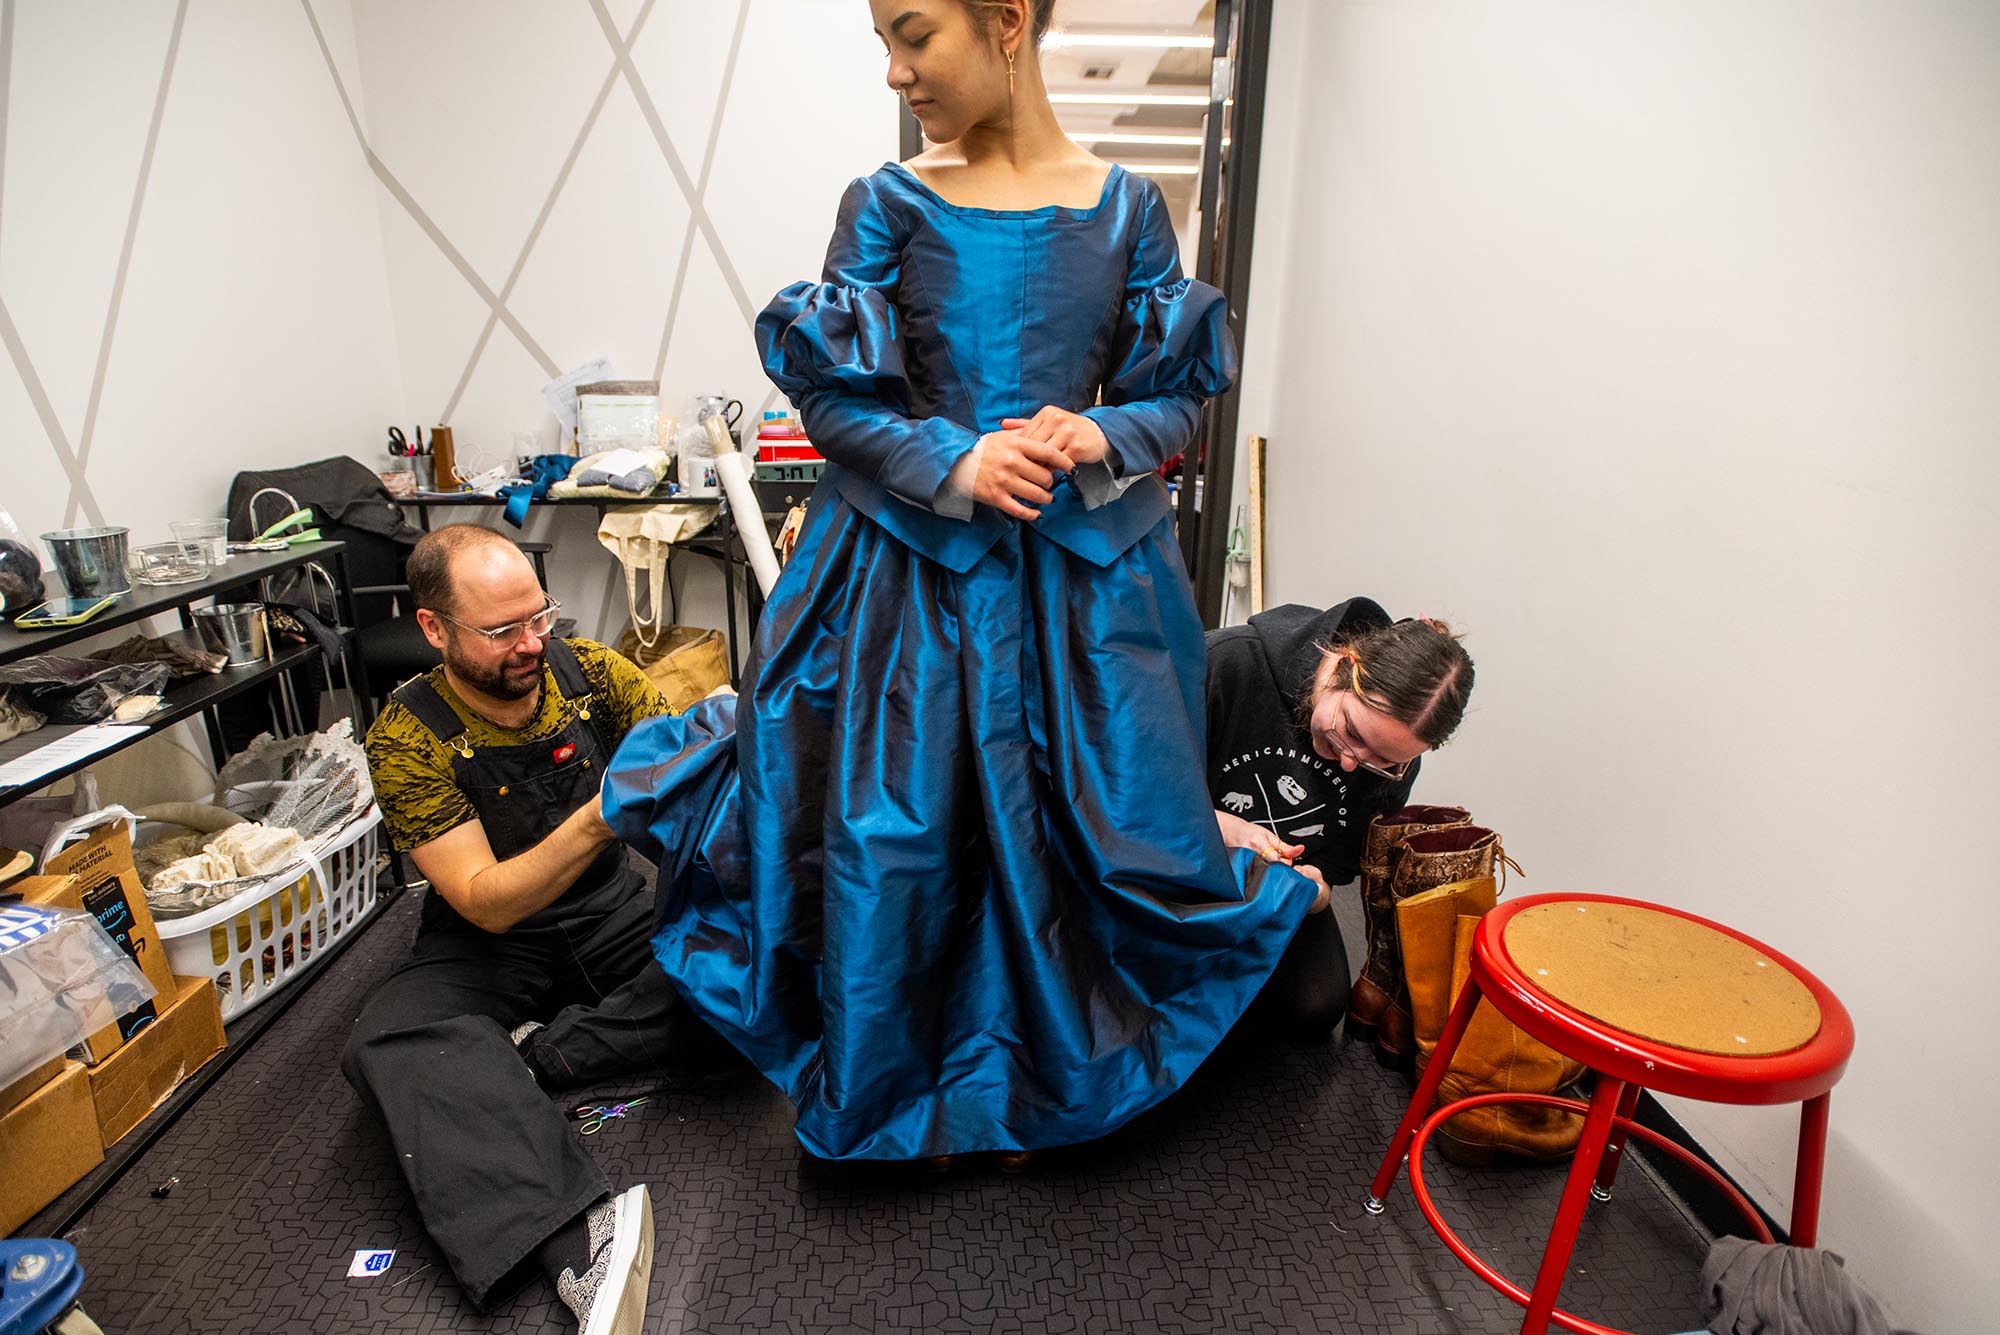 Photo: A women stands in a regal blue dress as the costume designers make amends to the garment. She looks down to watch them work.